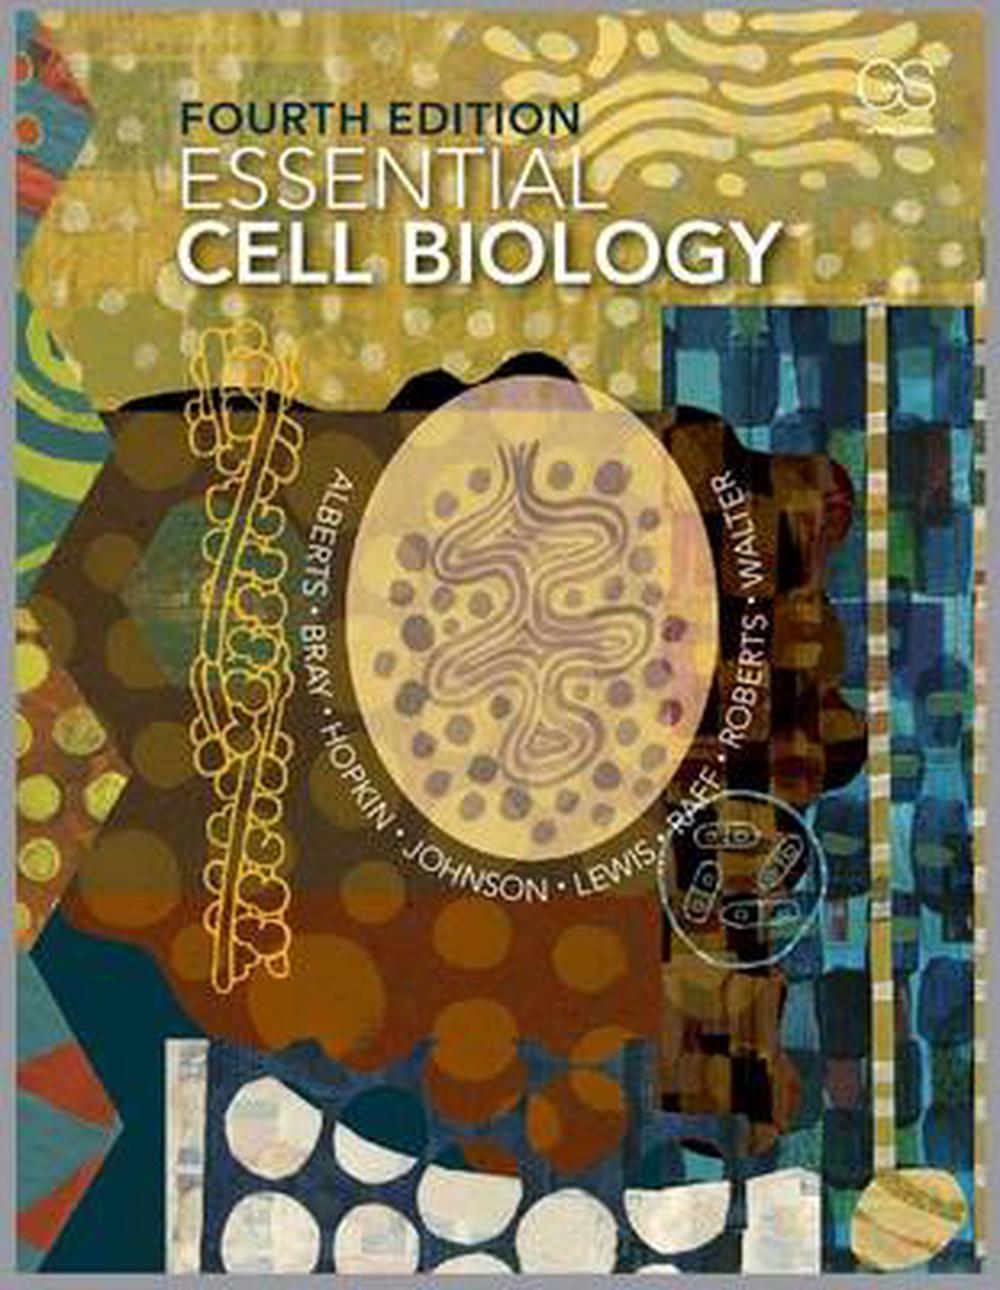 Essential Cell Biology by Bruce Alberts, Hardcover